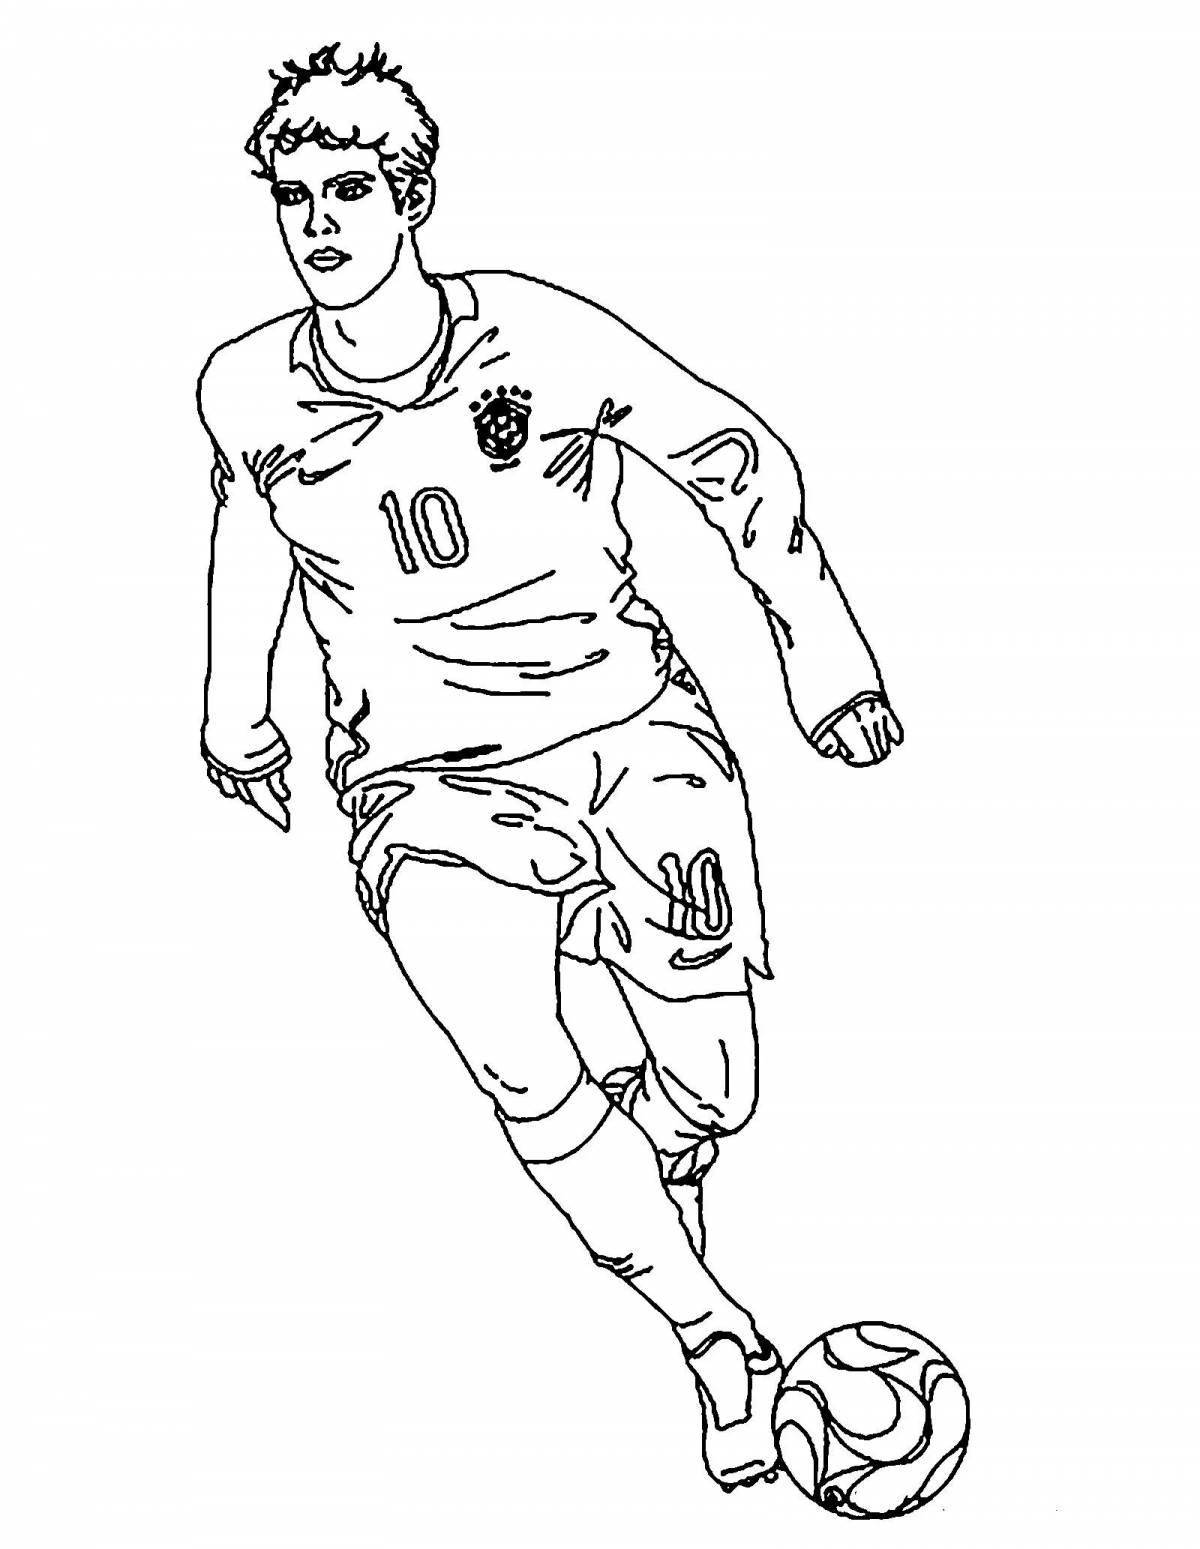 Playful messi coloring for kids